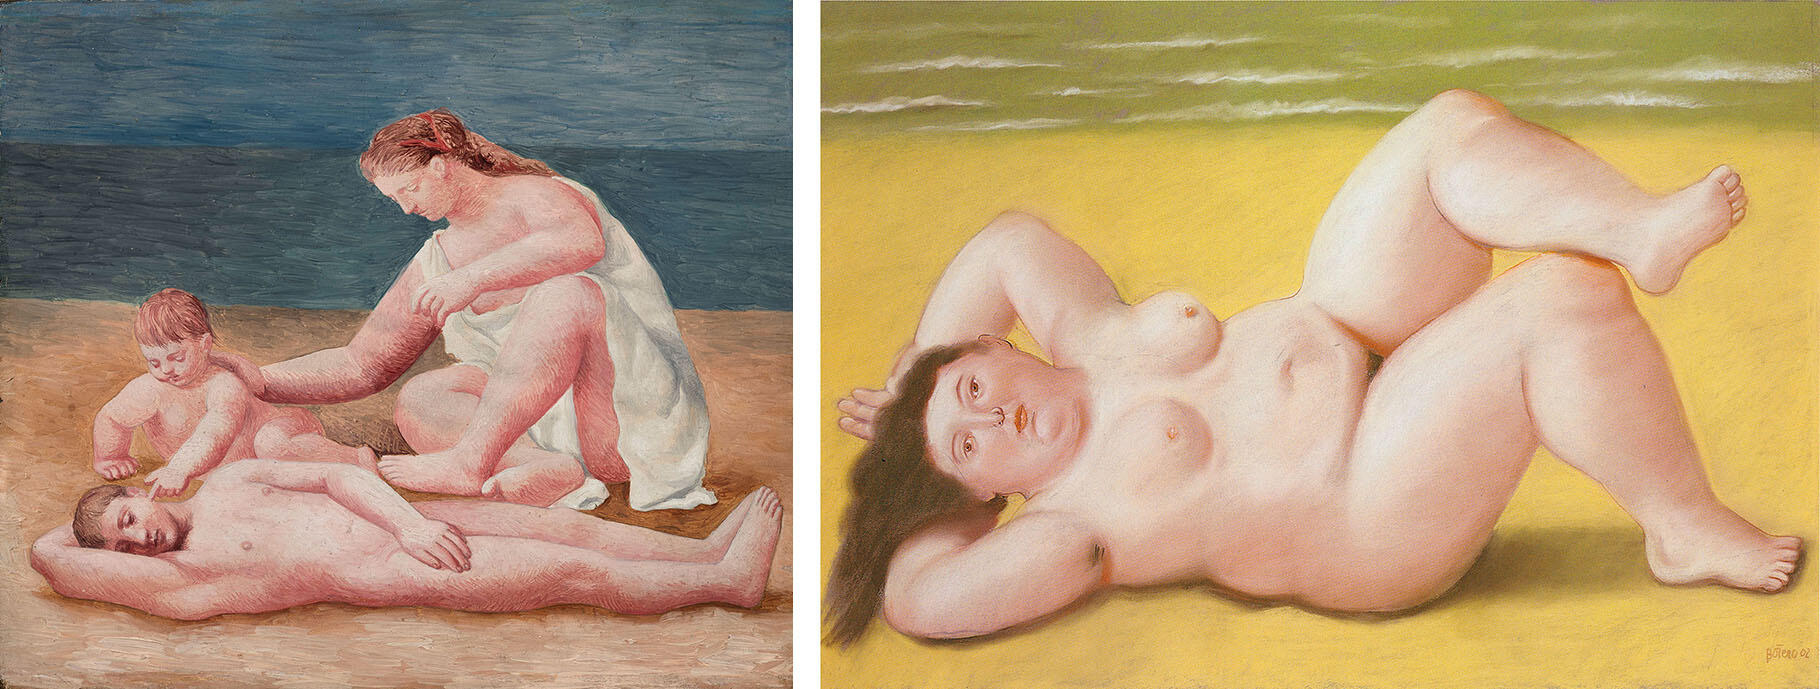  Pablo Picasso, “Family at the Seaside” (Dinard, Summer 1922). Oil on wood, 17.6x20.2 cm; and Fernando Botero, “Woman at the Beach” (2002). Pastel on canvas, 69x104 cm.